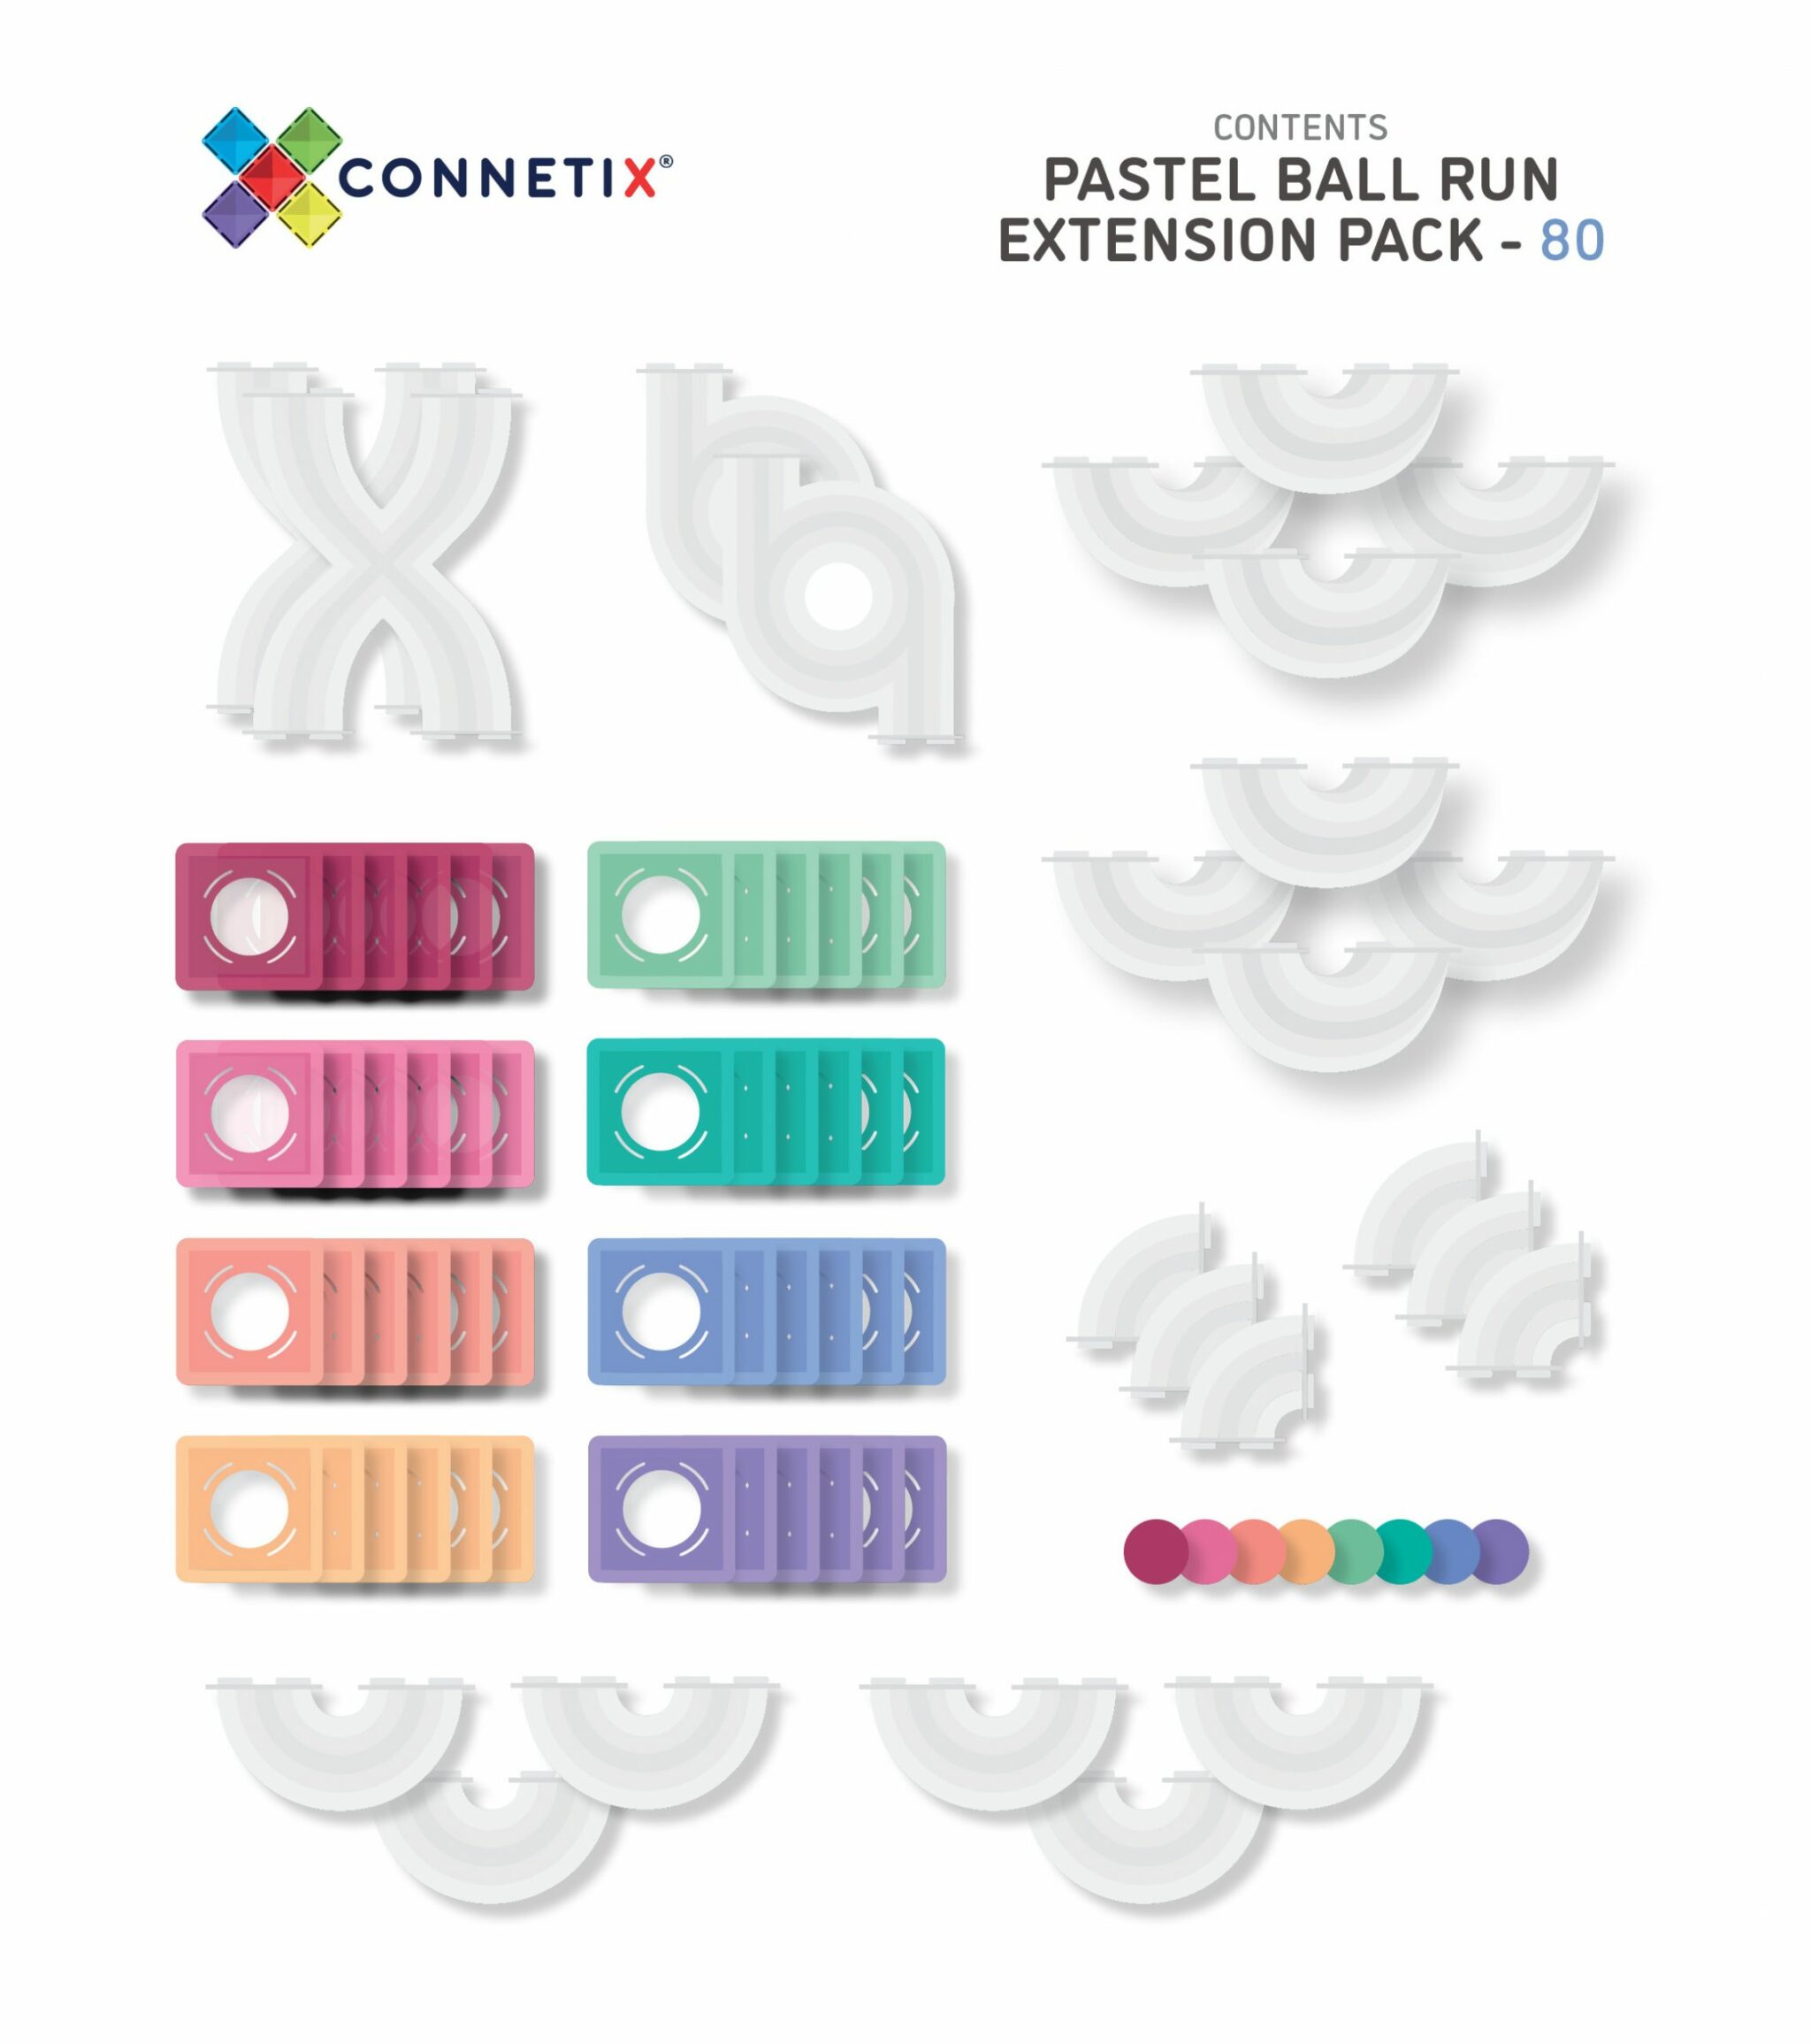 80-Pastel-Ball-Run-Ext-Pack-Contents-scaled-scaled-1